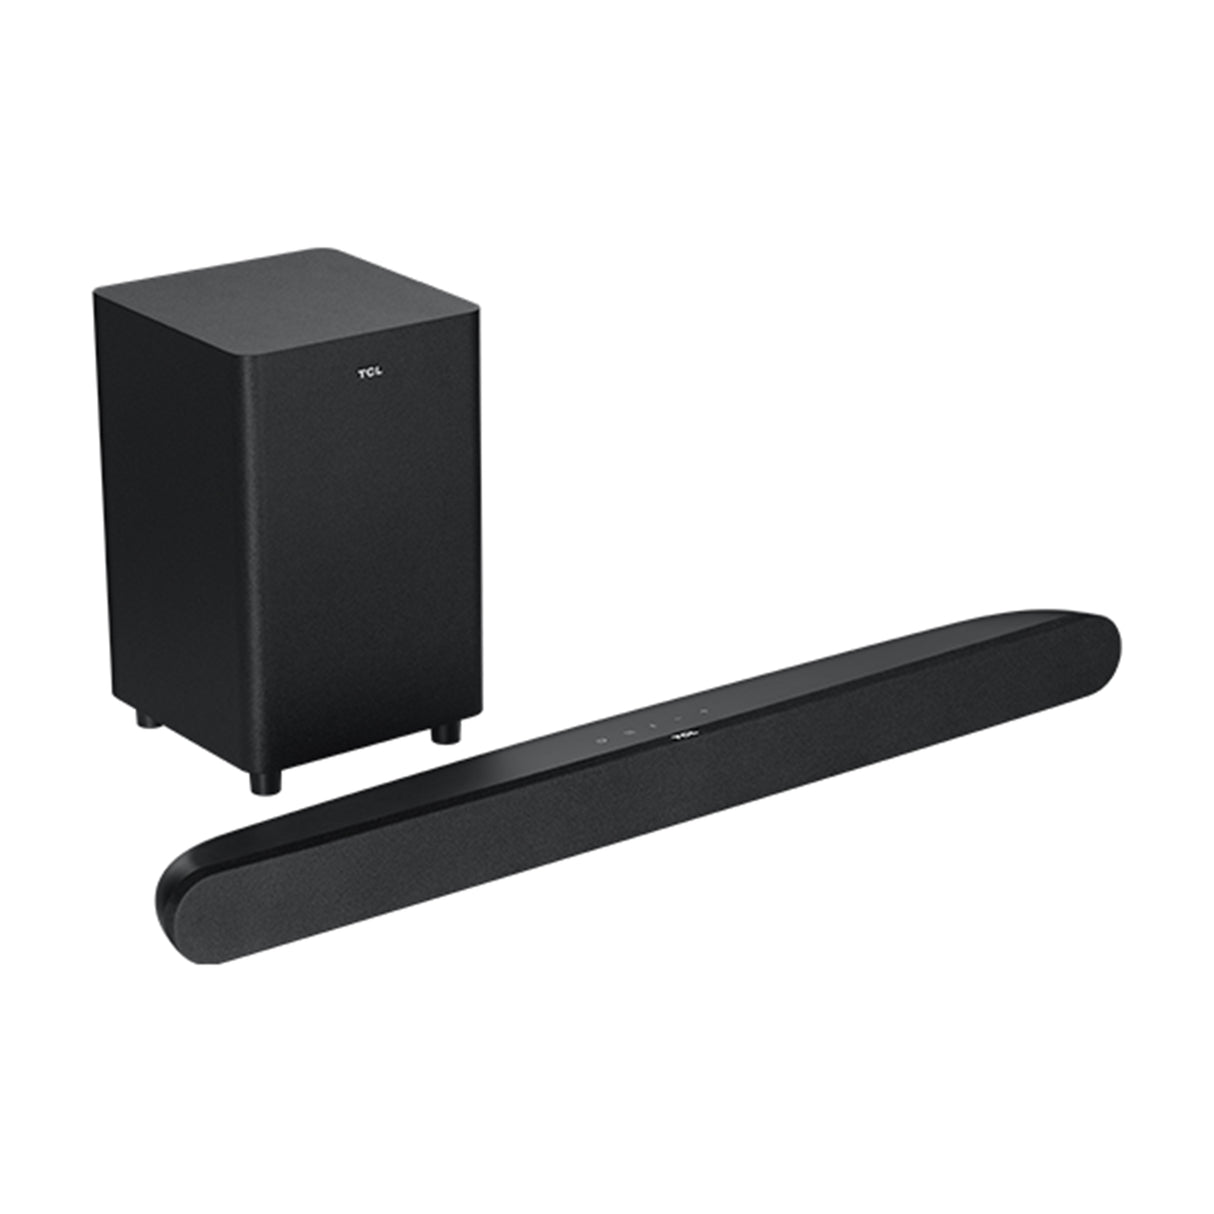 TCL TS6110 - 2.1 Channel Sound Bar with Wireless Subwoofer